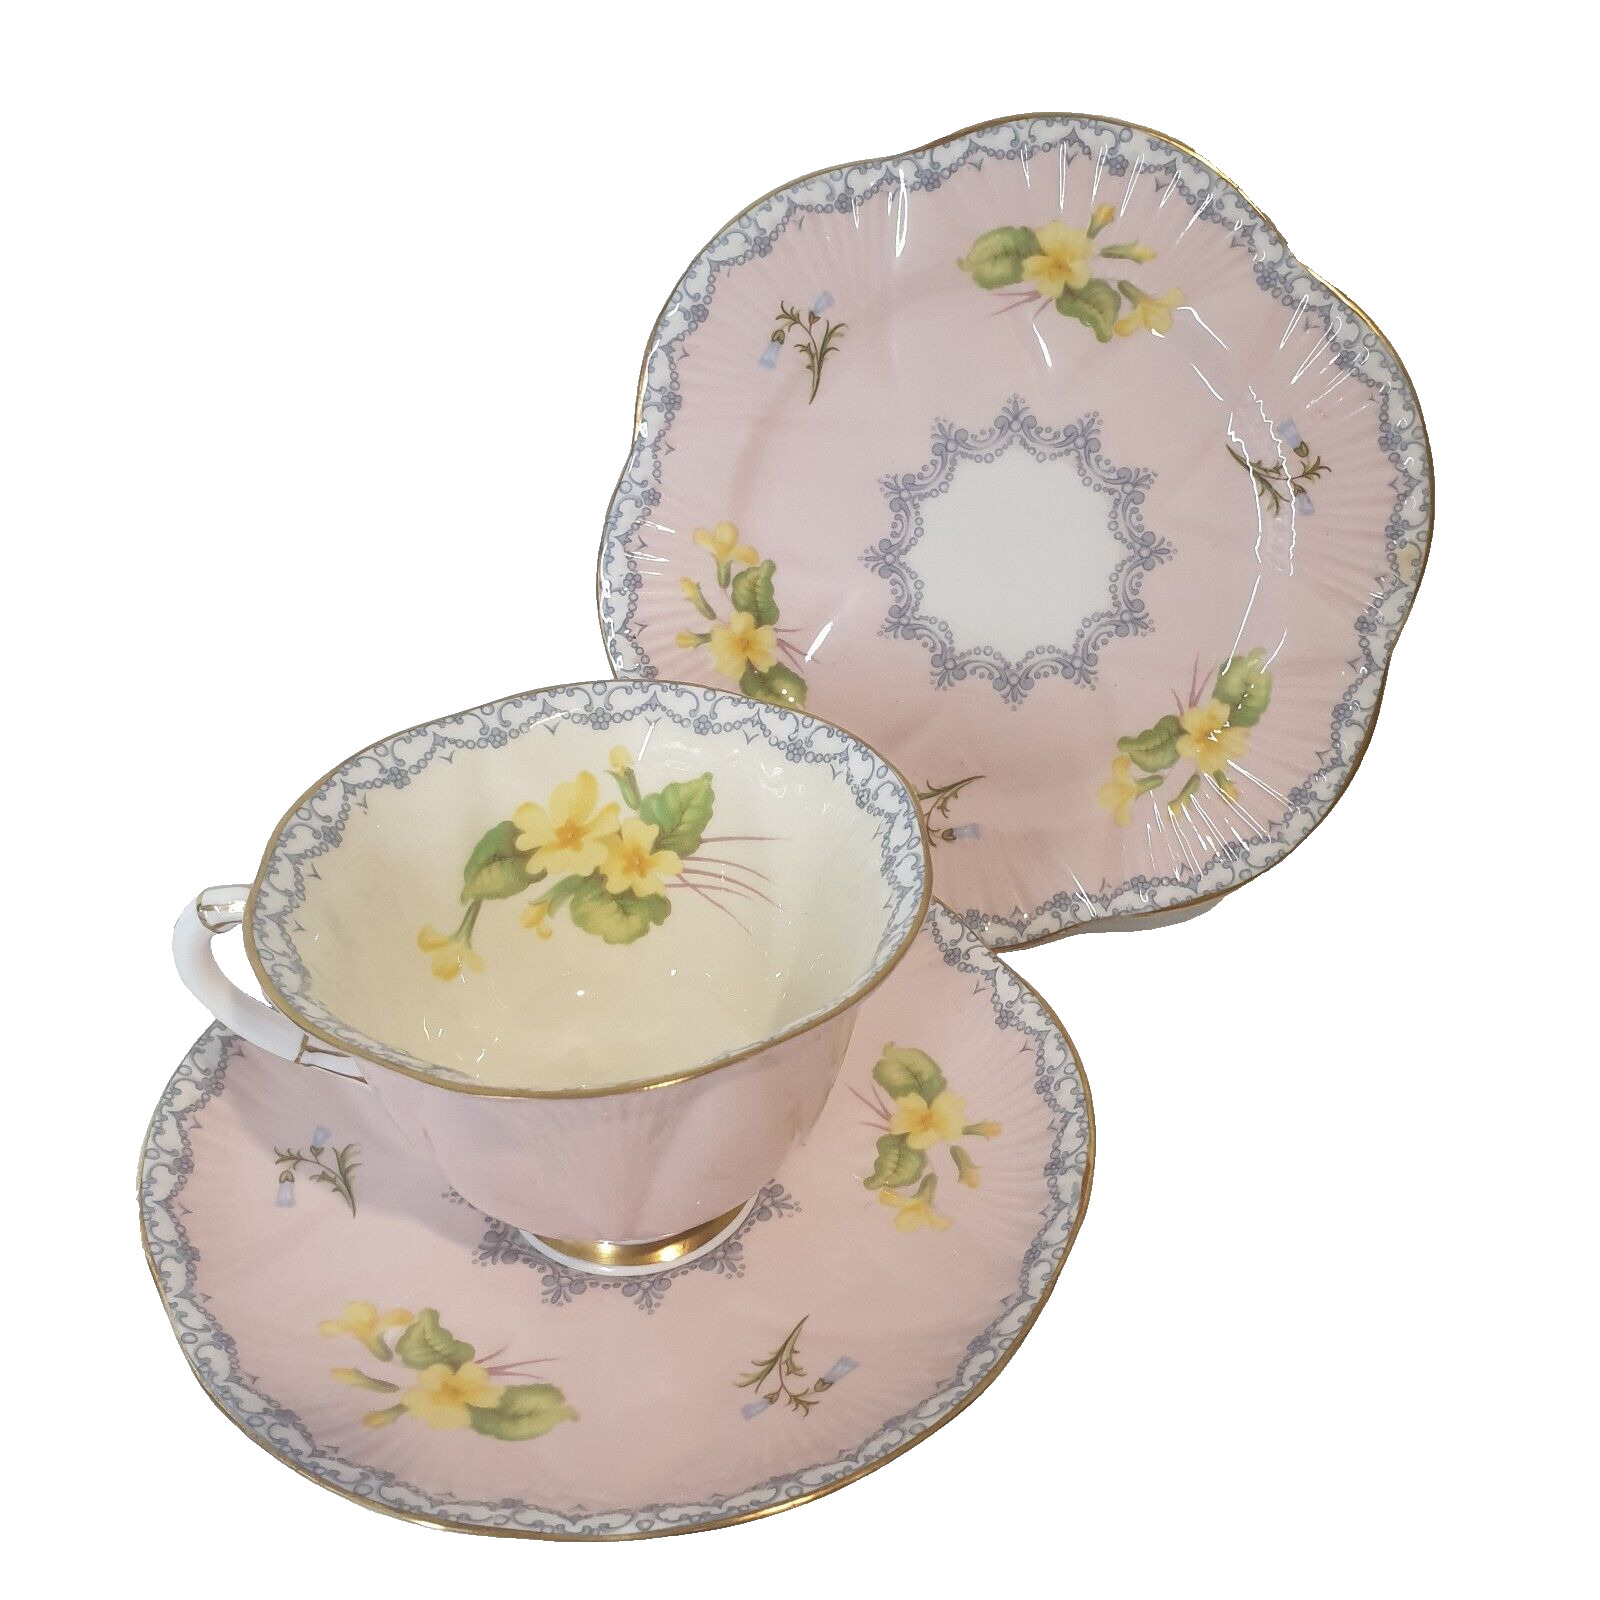 Shelley 1950s Dainty Primrose Mauve Footed Tea Cup, Saucer and Plate 3 Pieces